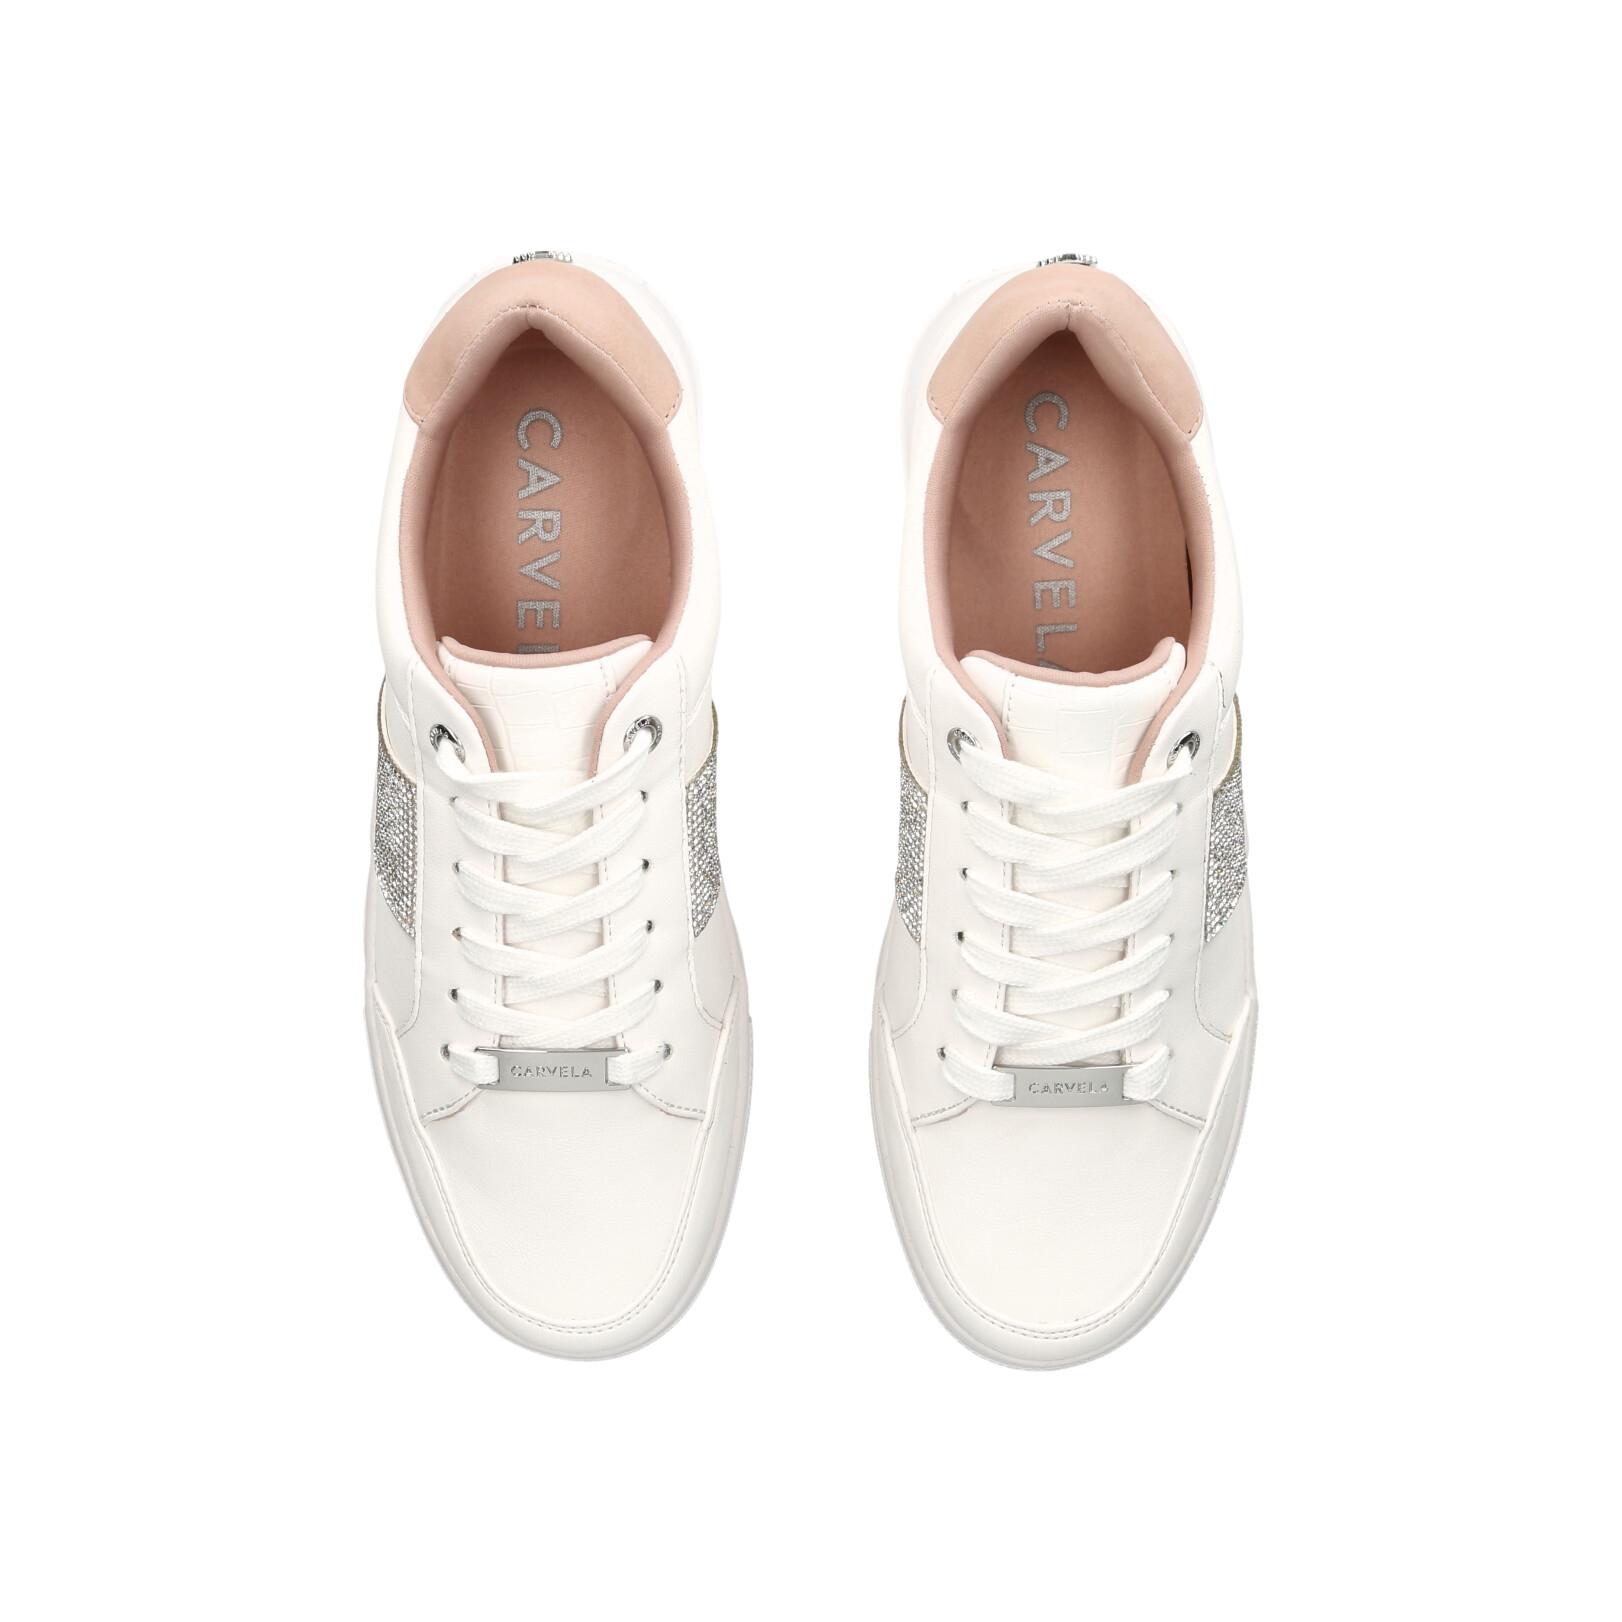 JIVE LACE UP - CARVELA Sneakers